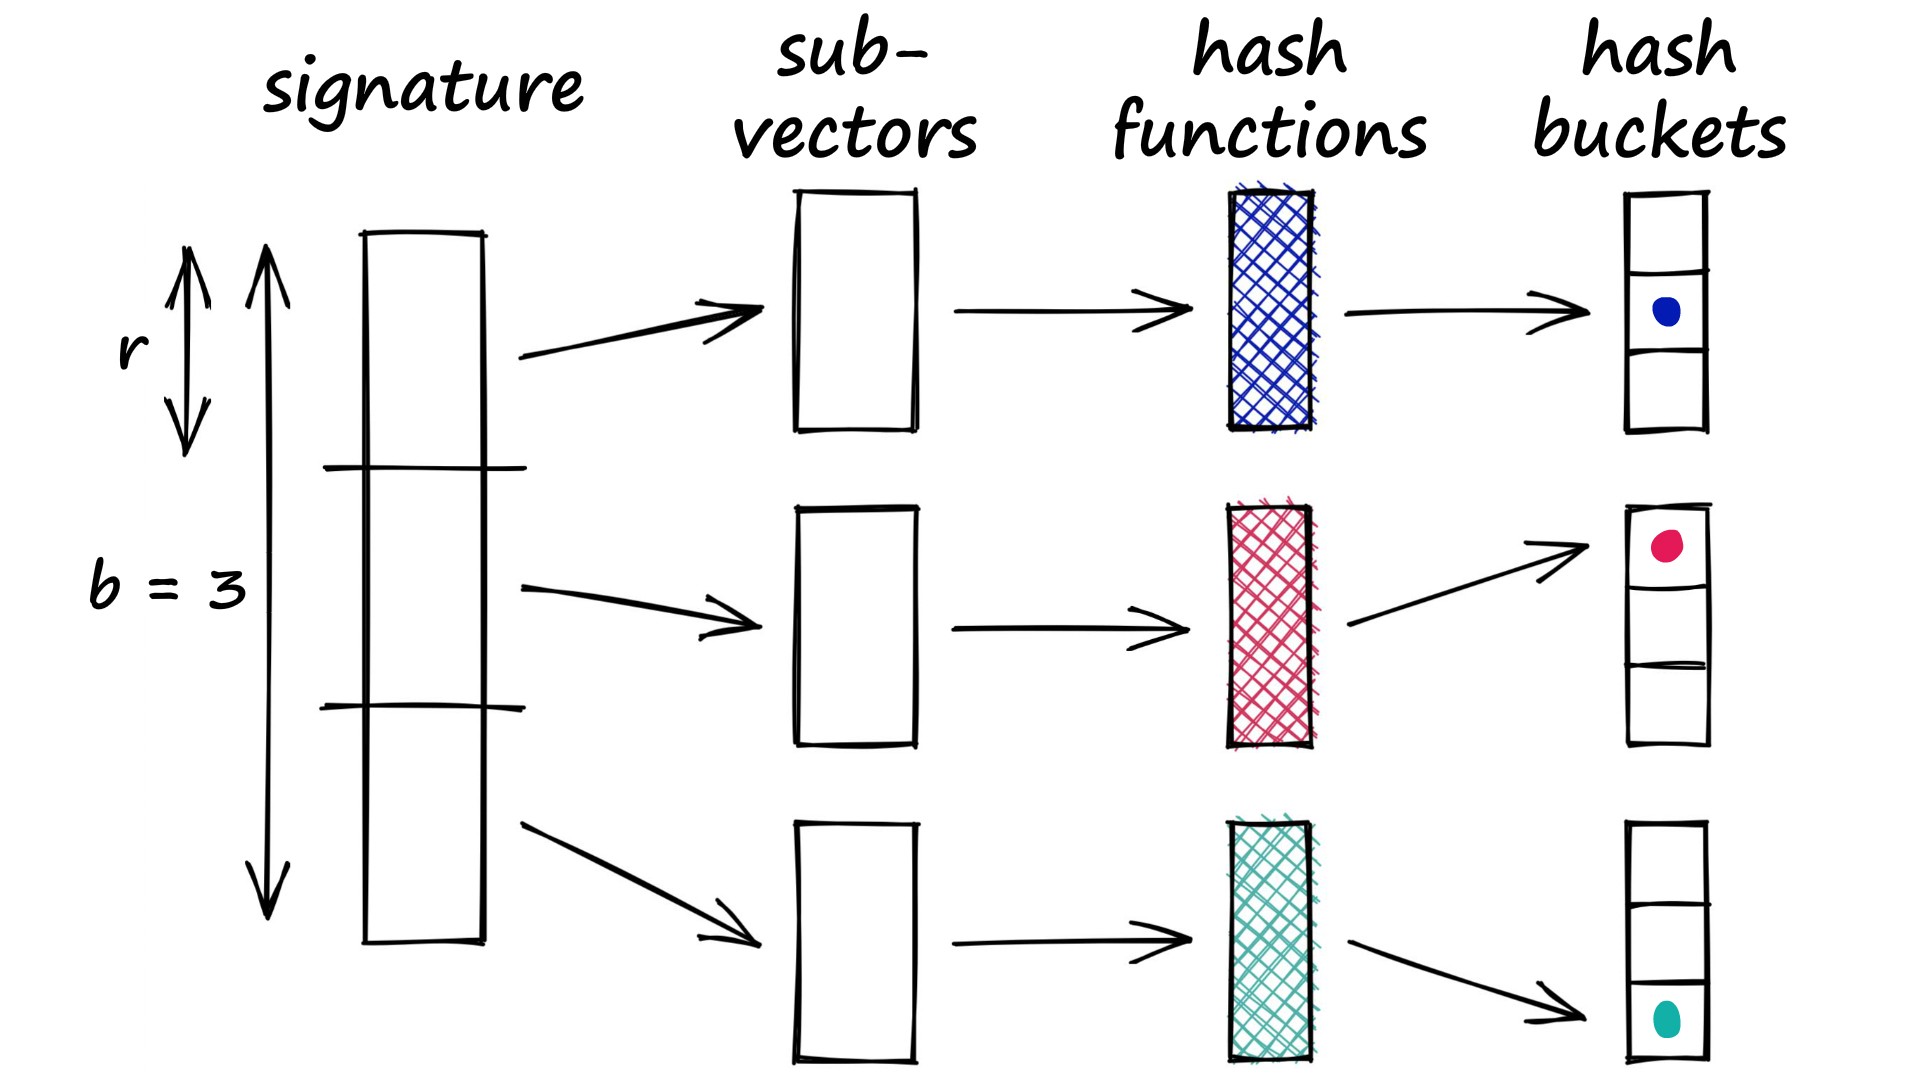 We split our signature into <strong>b</strong> sub-vectors, each is processed through a hash function (we can use a single hash function, or <strong>b</strong> hash functions) and mapped to a hash bucket.